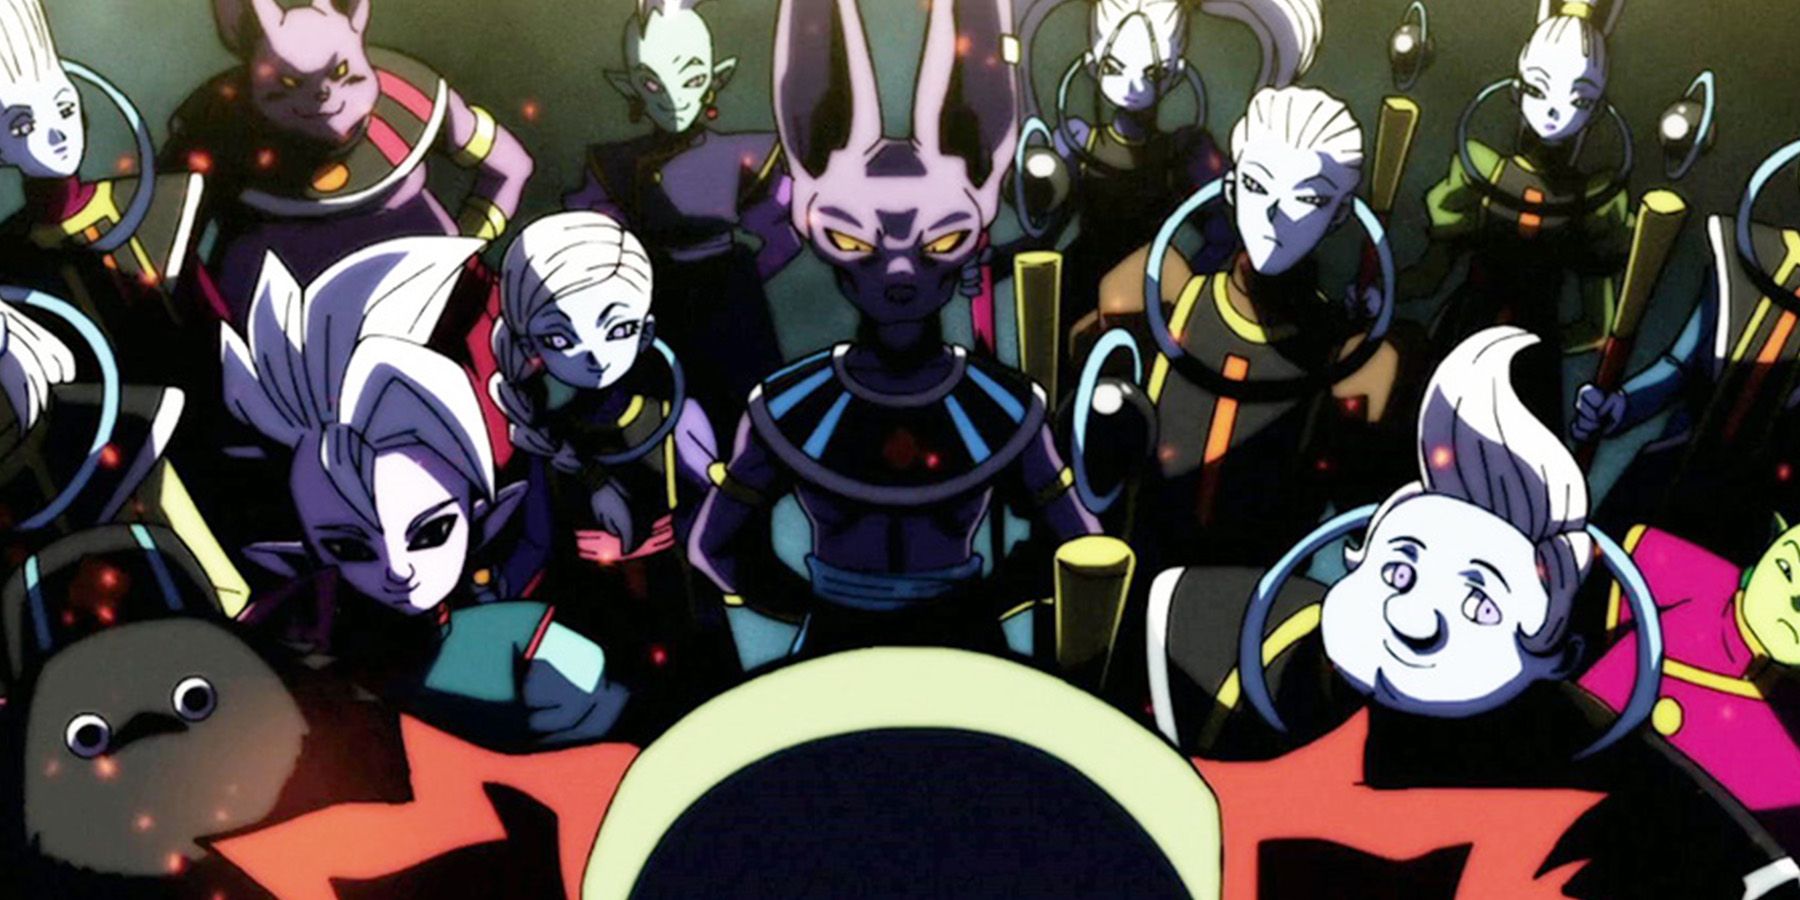 All of the Angels from the multiverse assemble in Dragon Ball Super